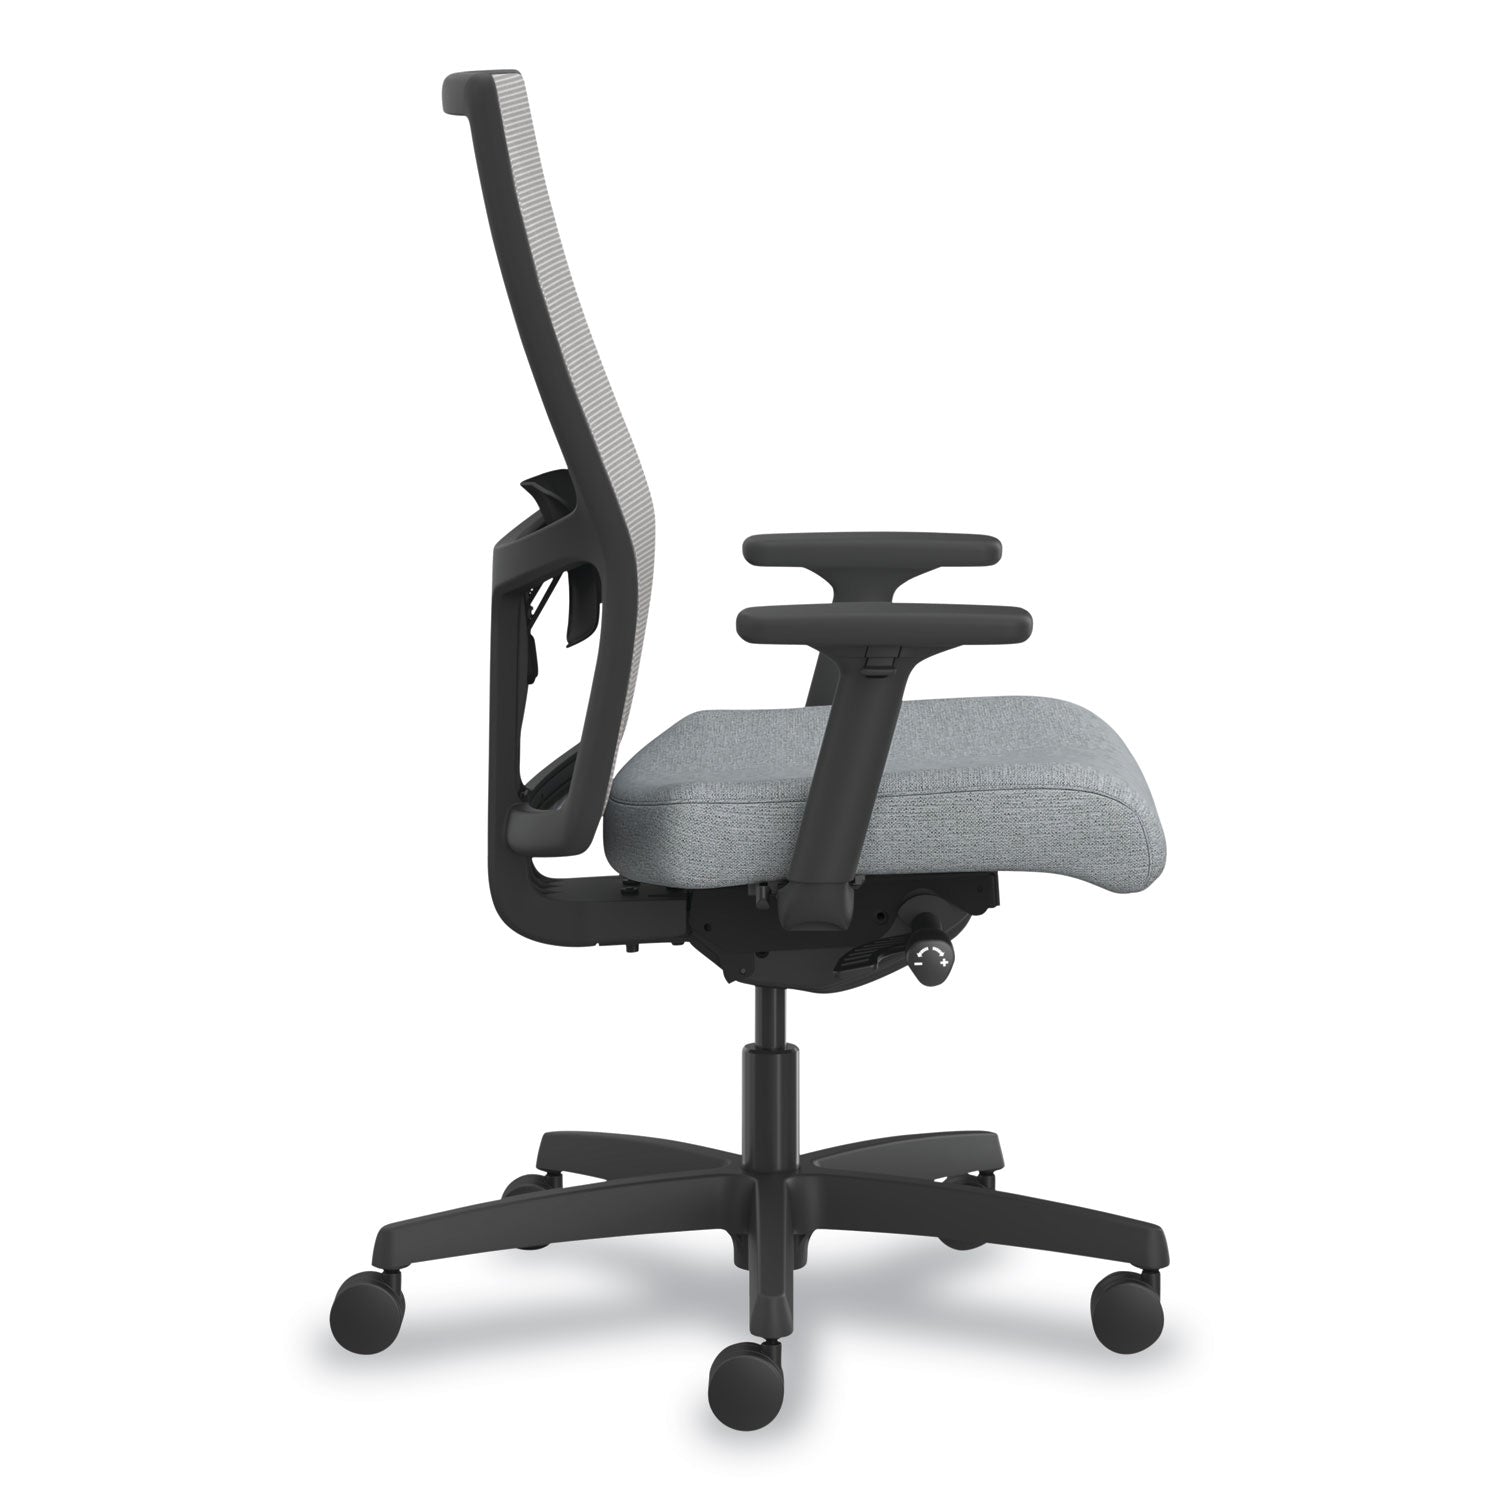 ignition-20-4-way-stretch-mid-back-mesh-task-chair-white-adjustable-lumbar-support-cloud-fog-white-ships-in-7-10-bus-days_honi2mm2afh18bt - 4